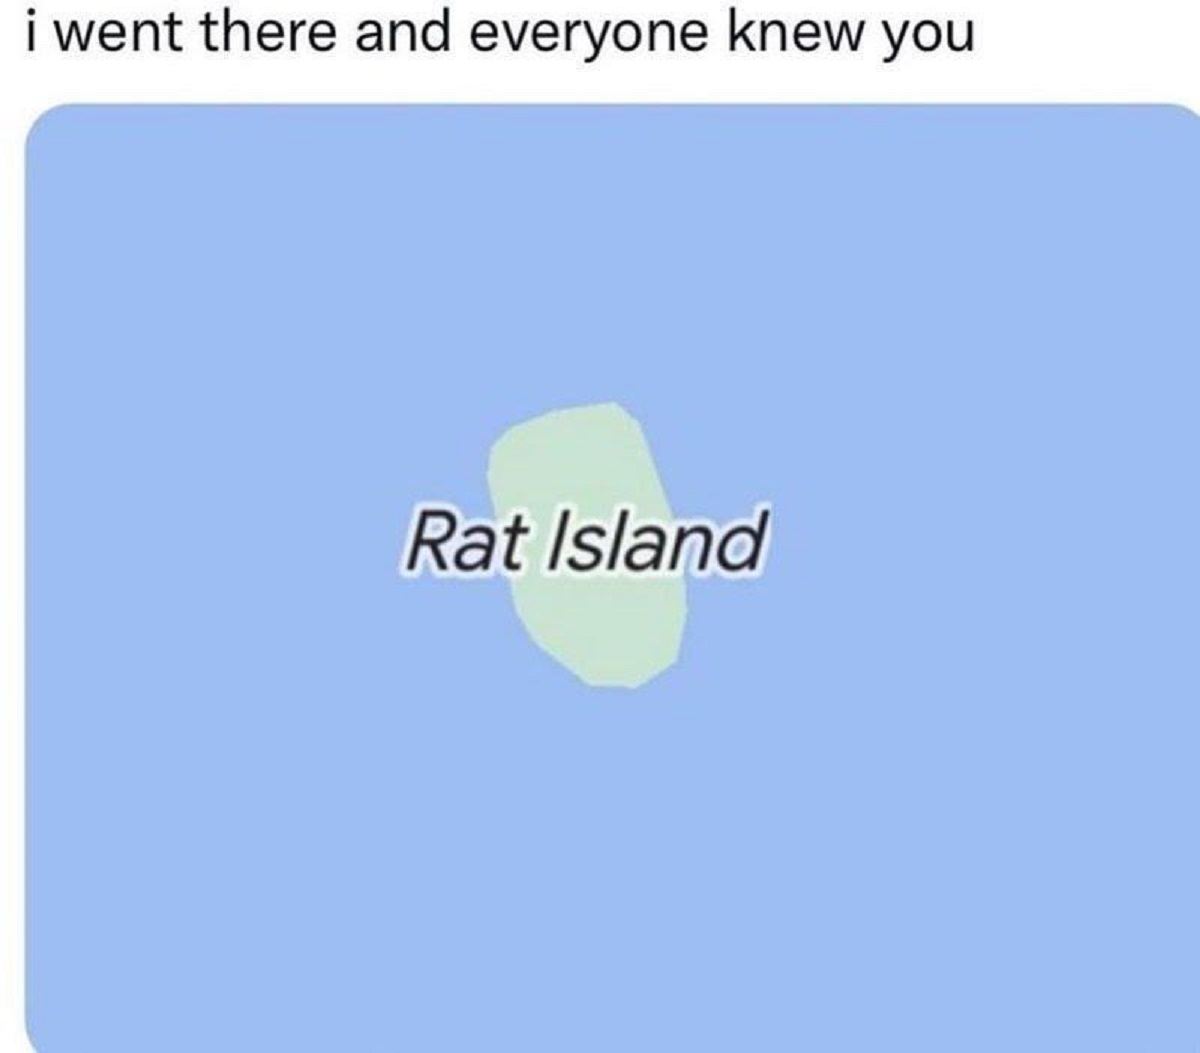 diagram - i went there and everyone knew you Rat Island